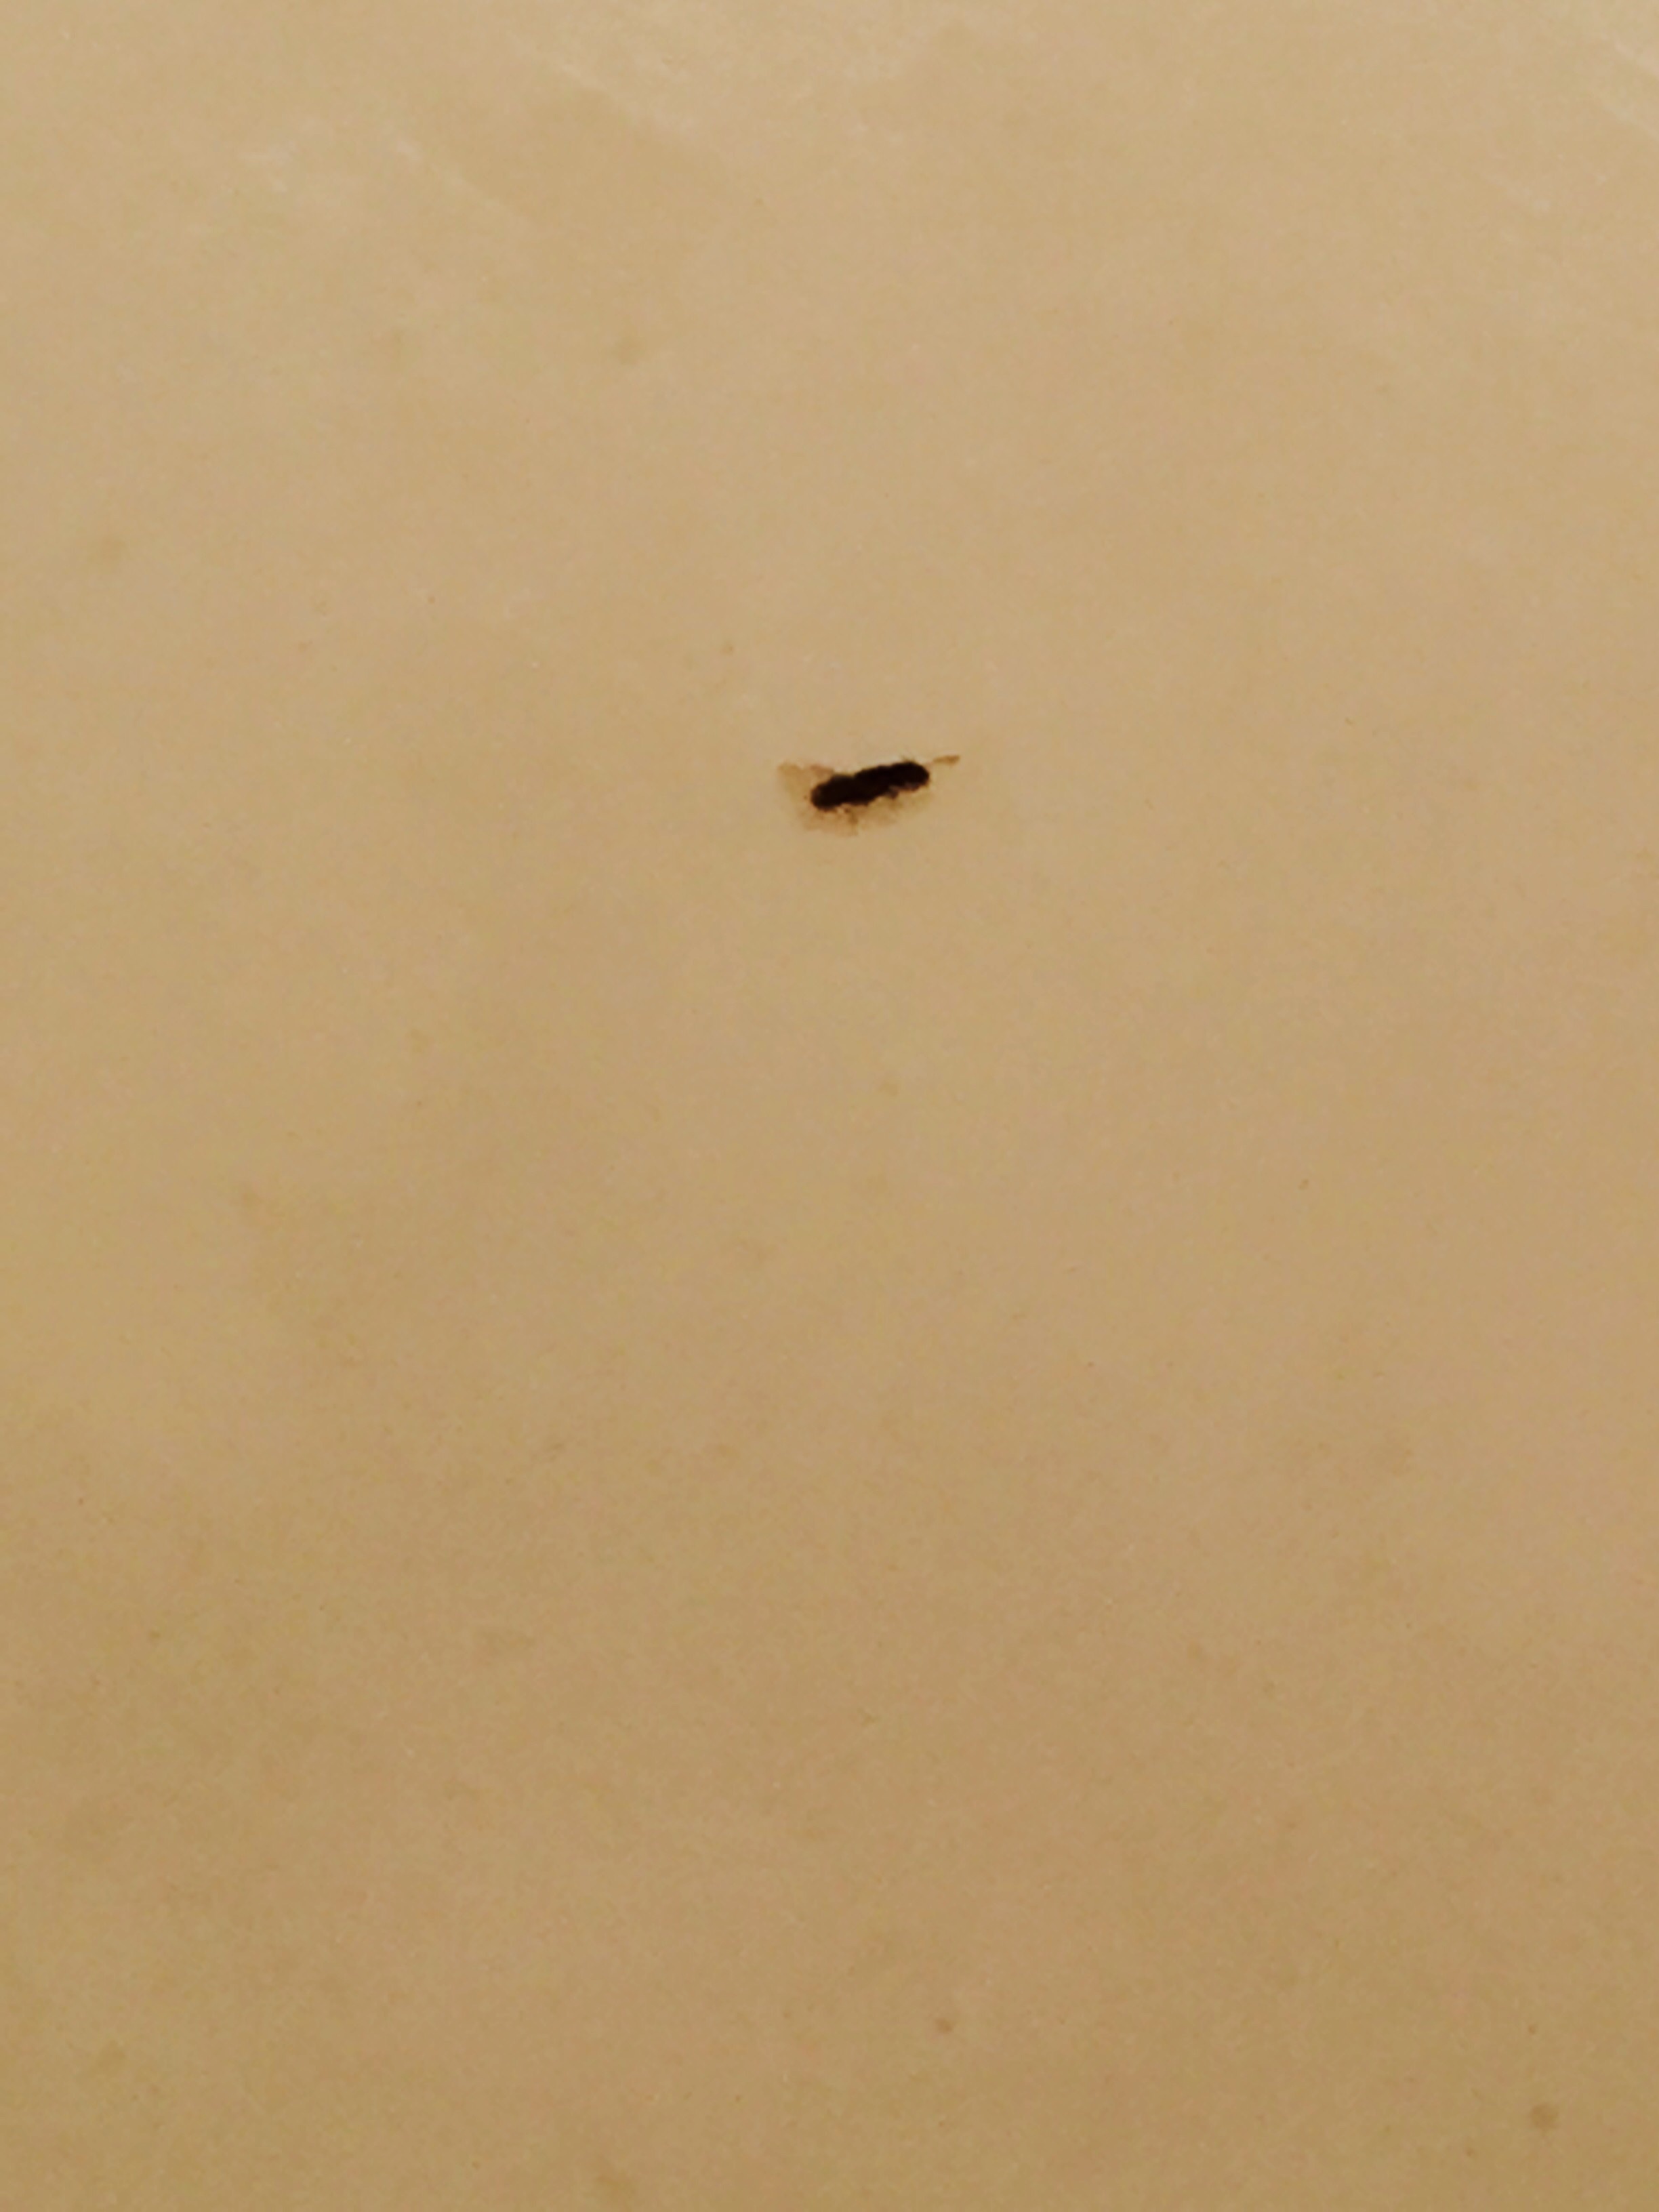 Small Black Bugs With Wings 267008, Small Black Bugs Coming Out Of Bathtub Drain